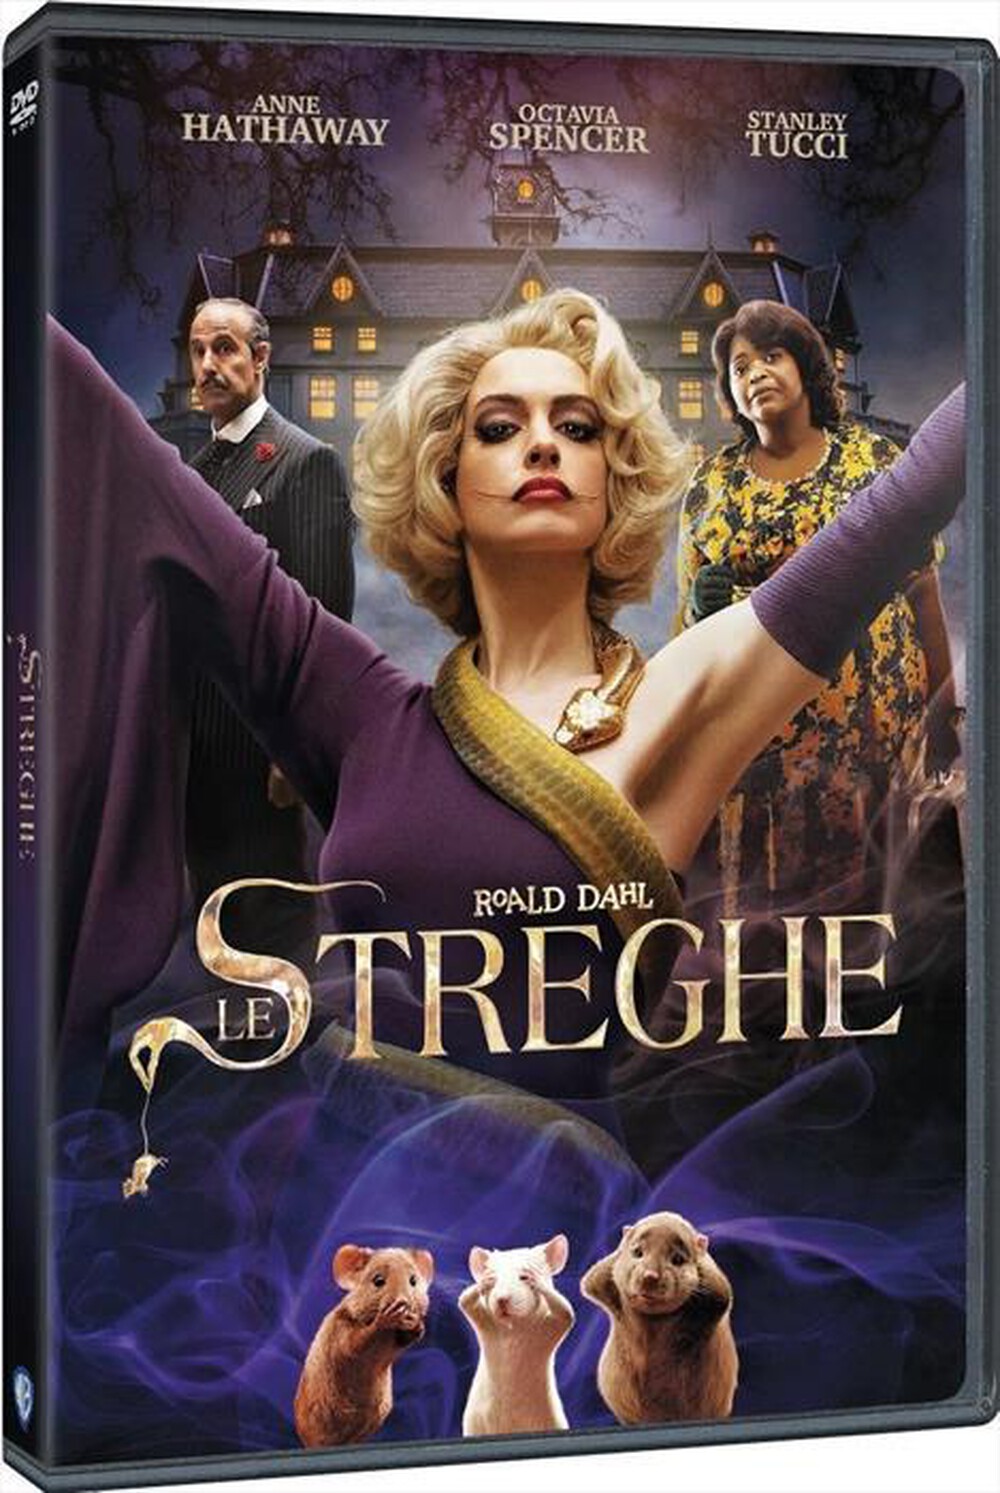 "WARNER HOME VIDEO - Streghe (Le) - "